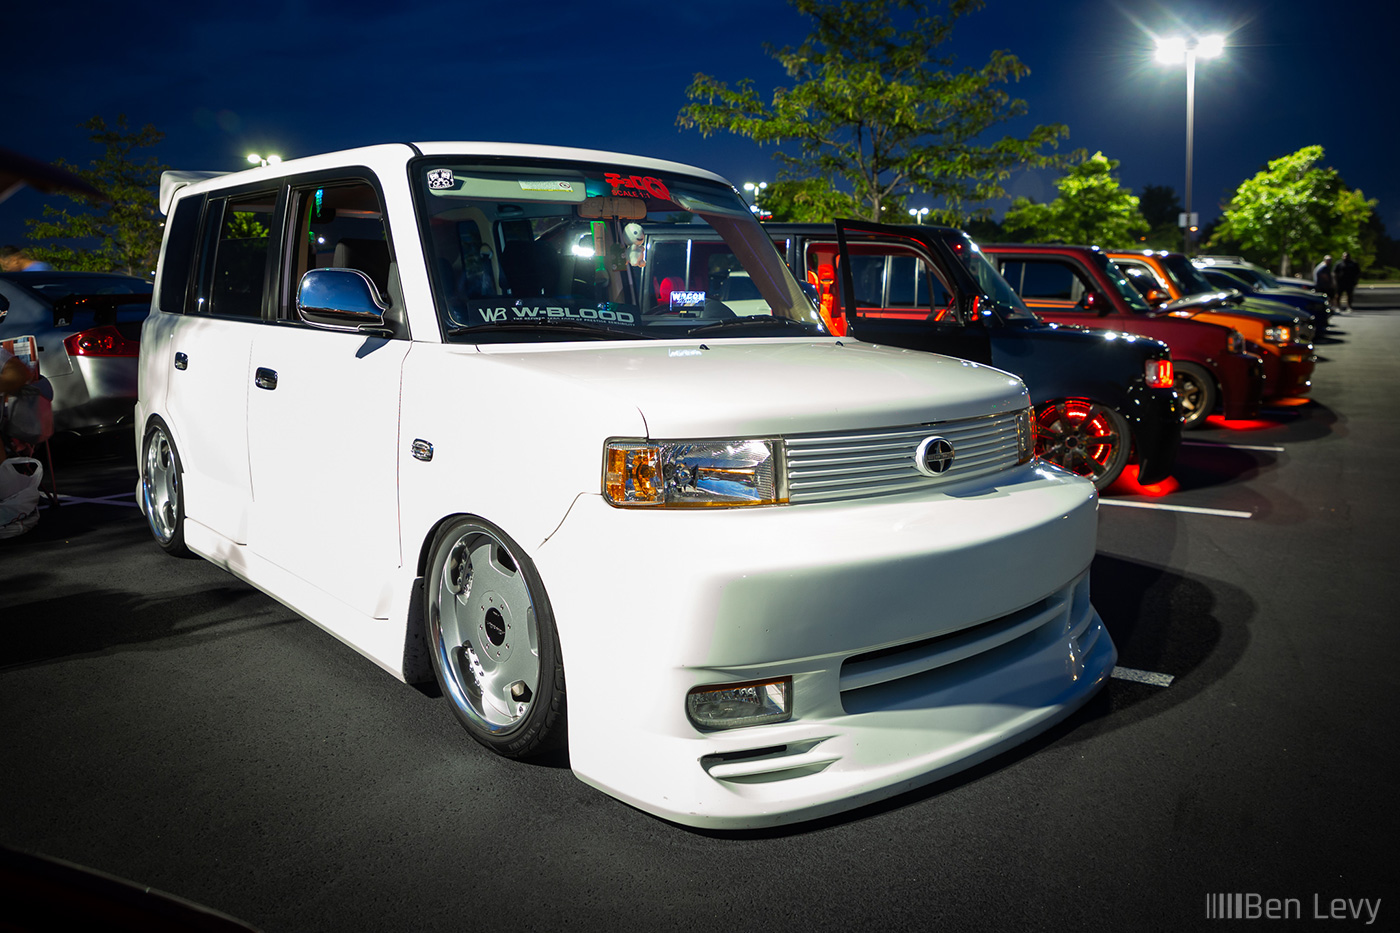 White Scion xB at Cars and Culture Meet